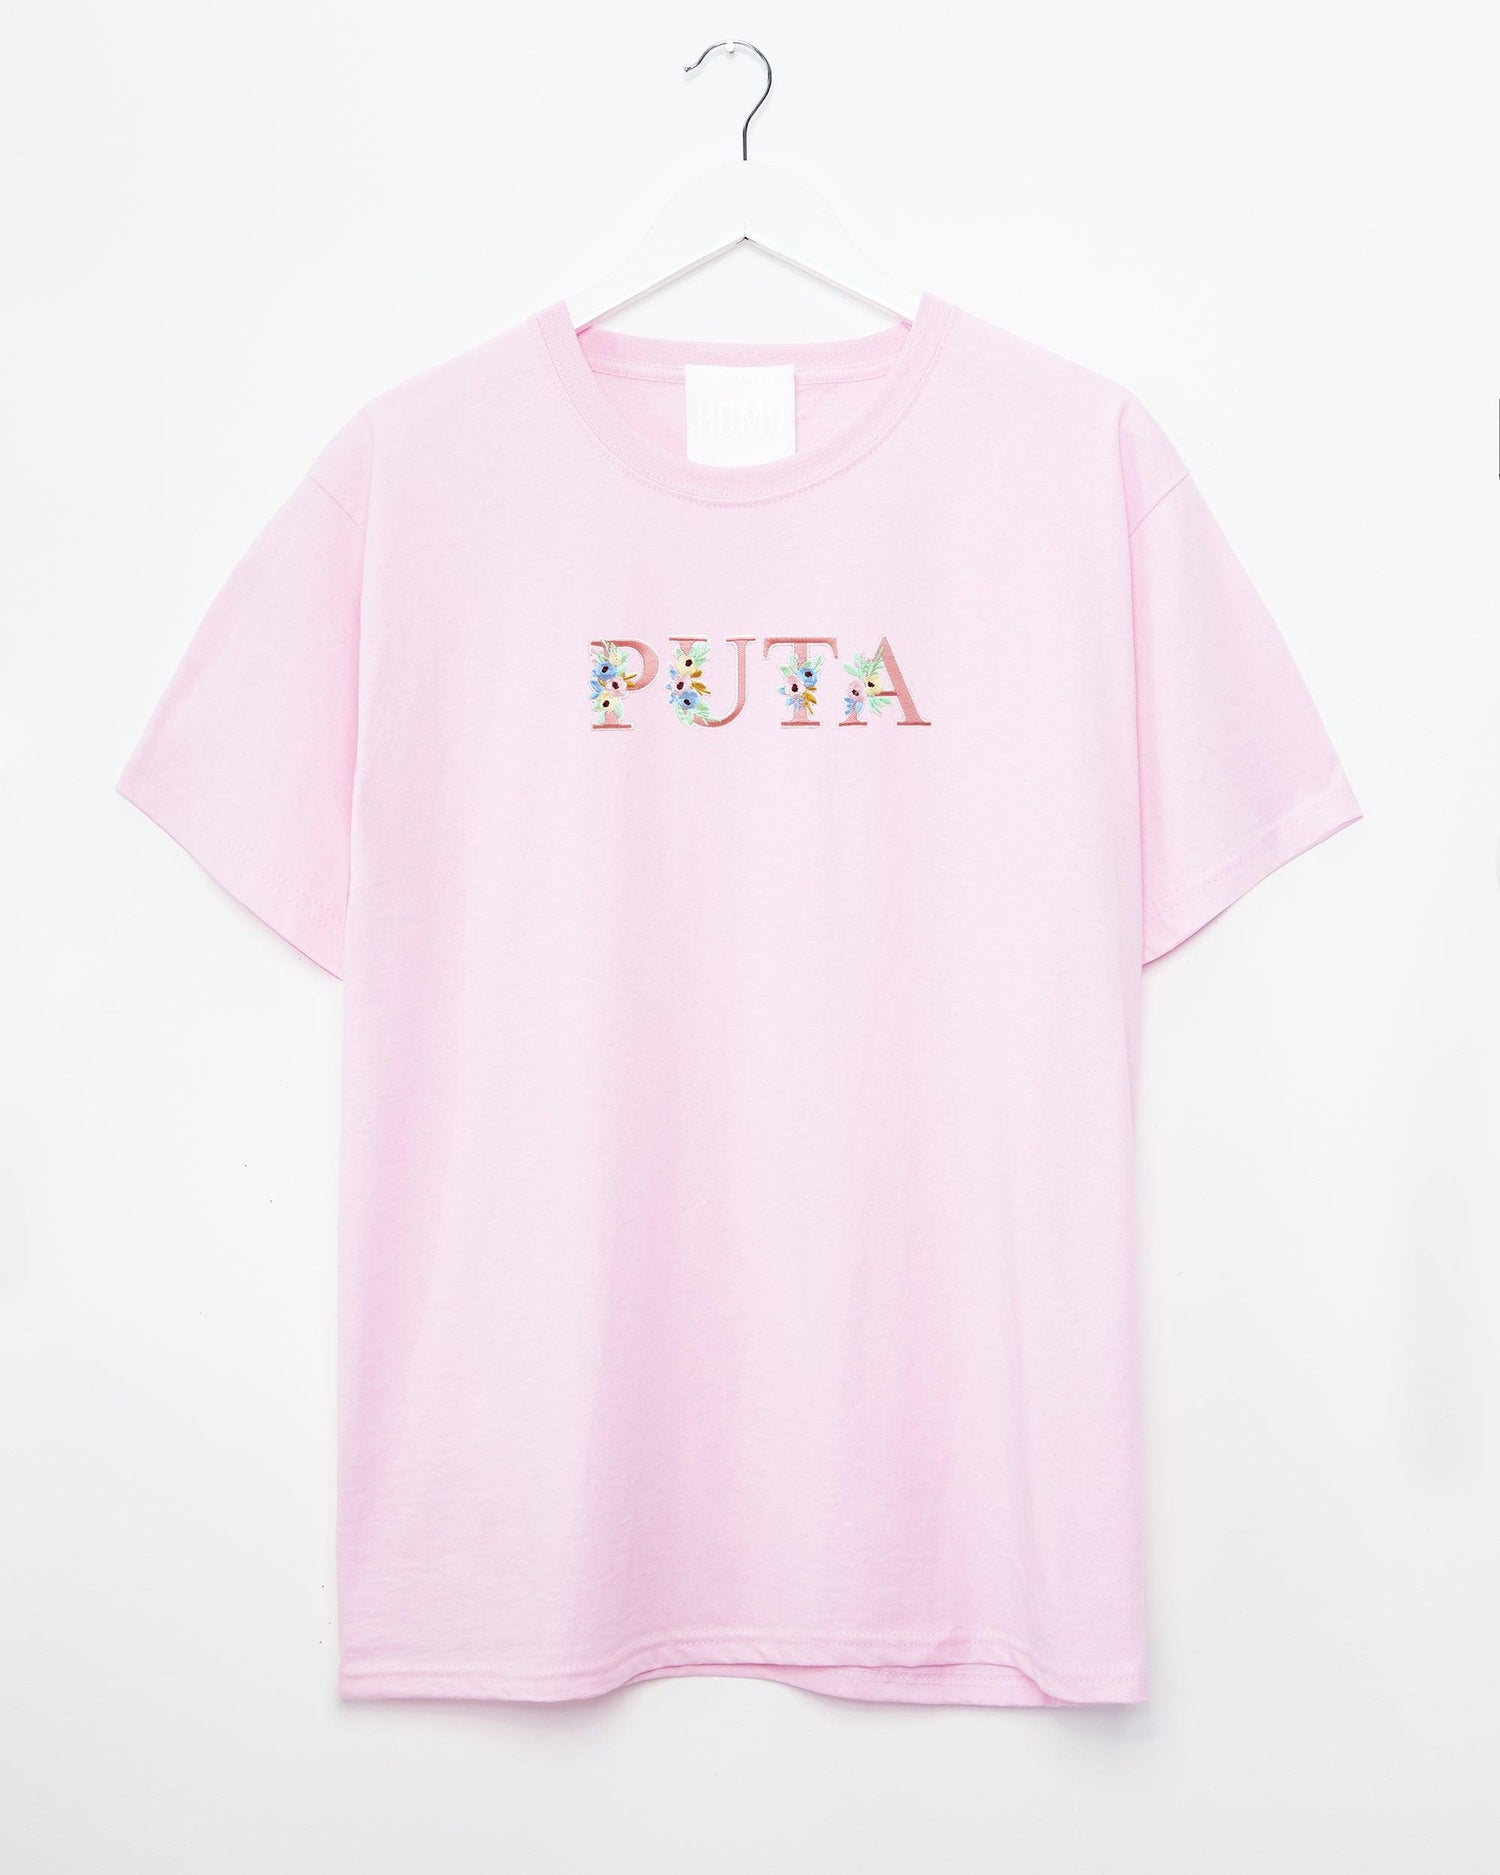 Floral style puta embroidery on pink - tee - HOMOLONDON